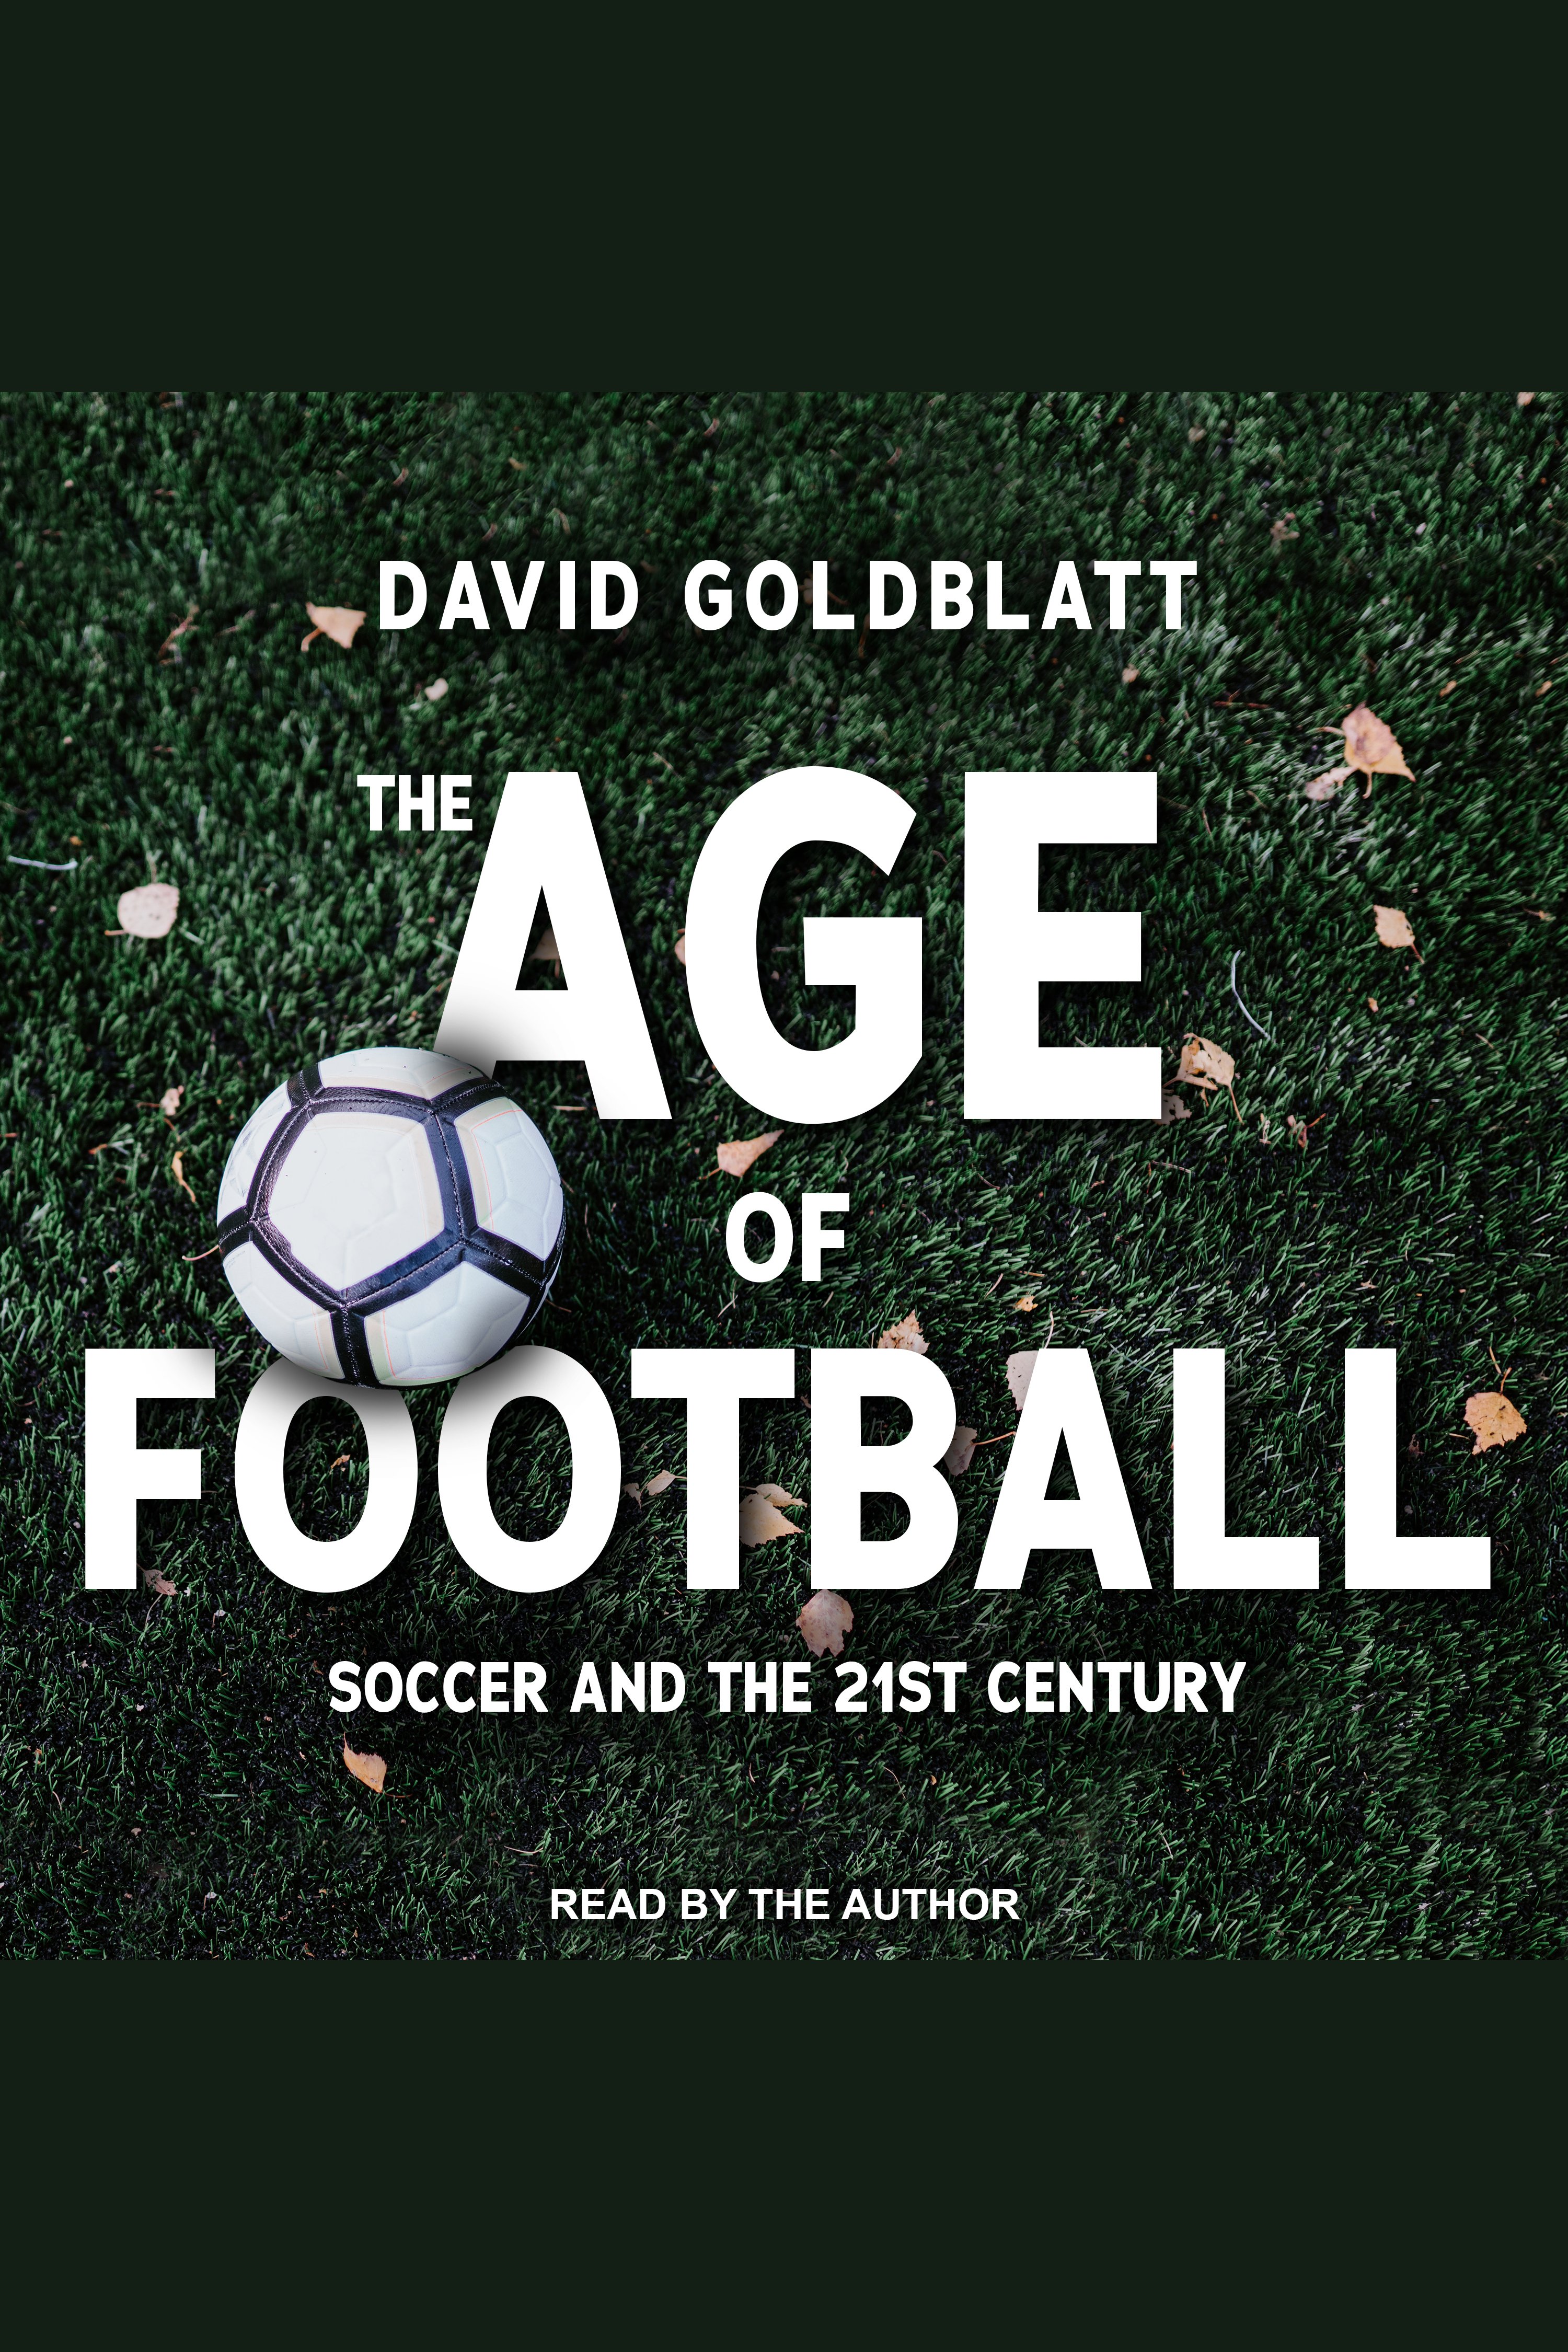 The age of football soccer and the 21st century cover image